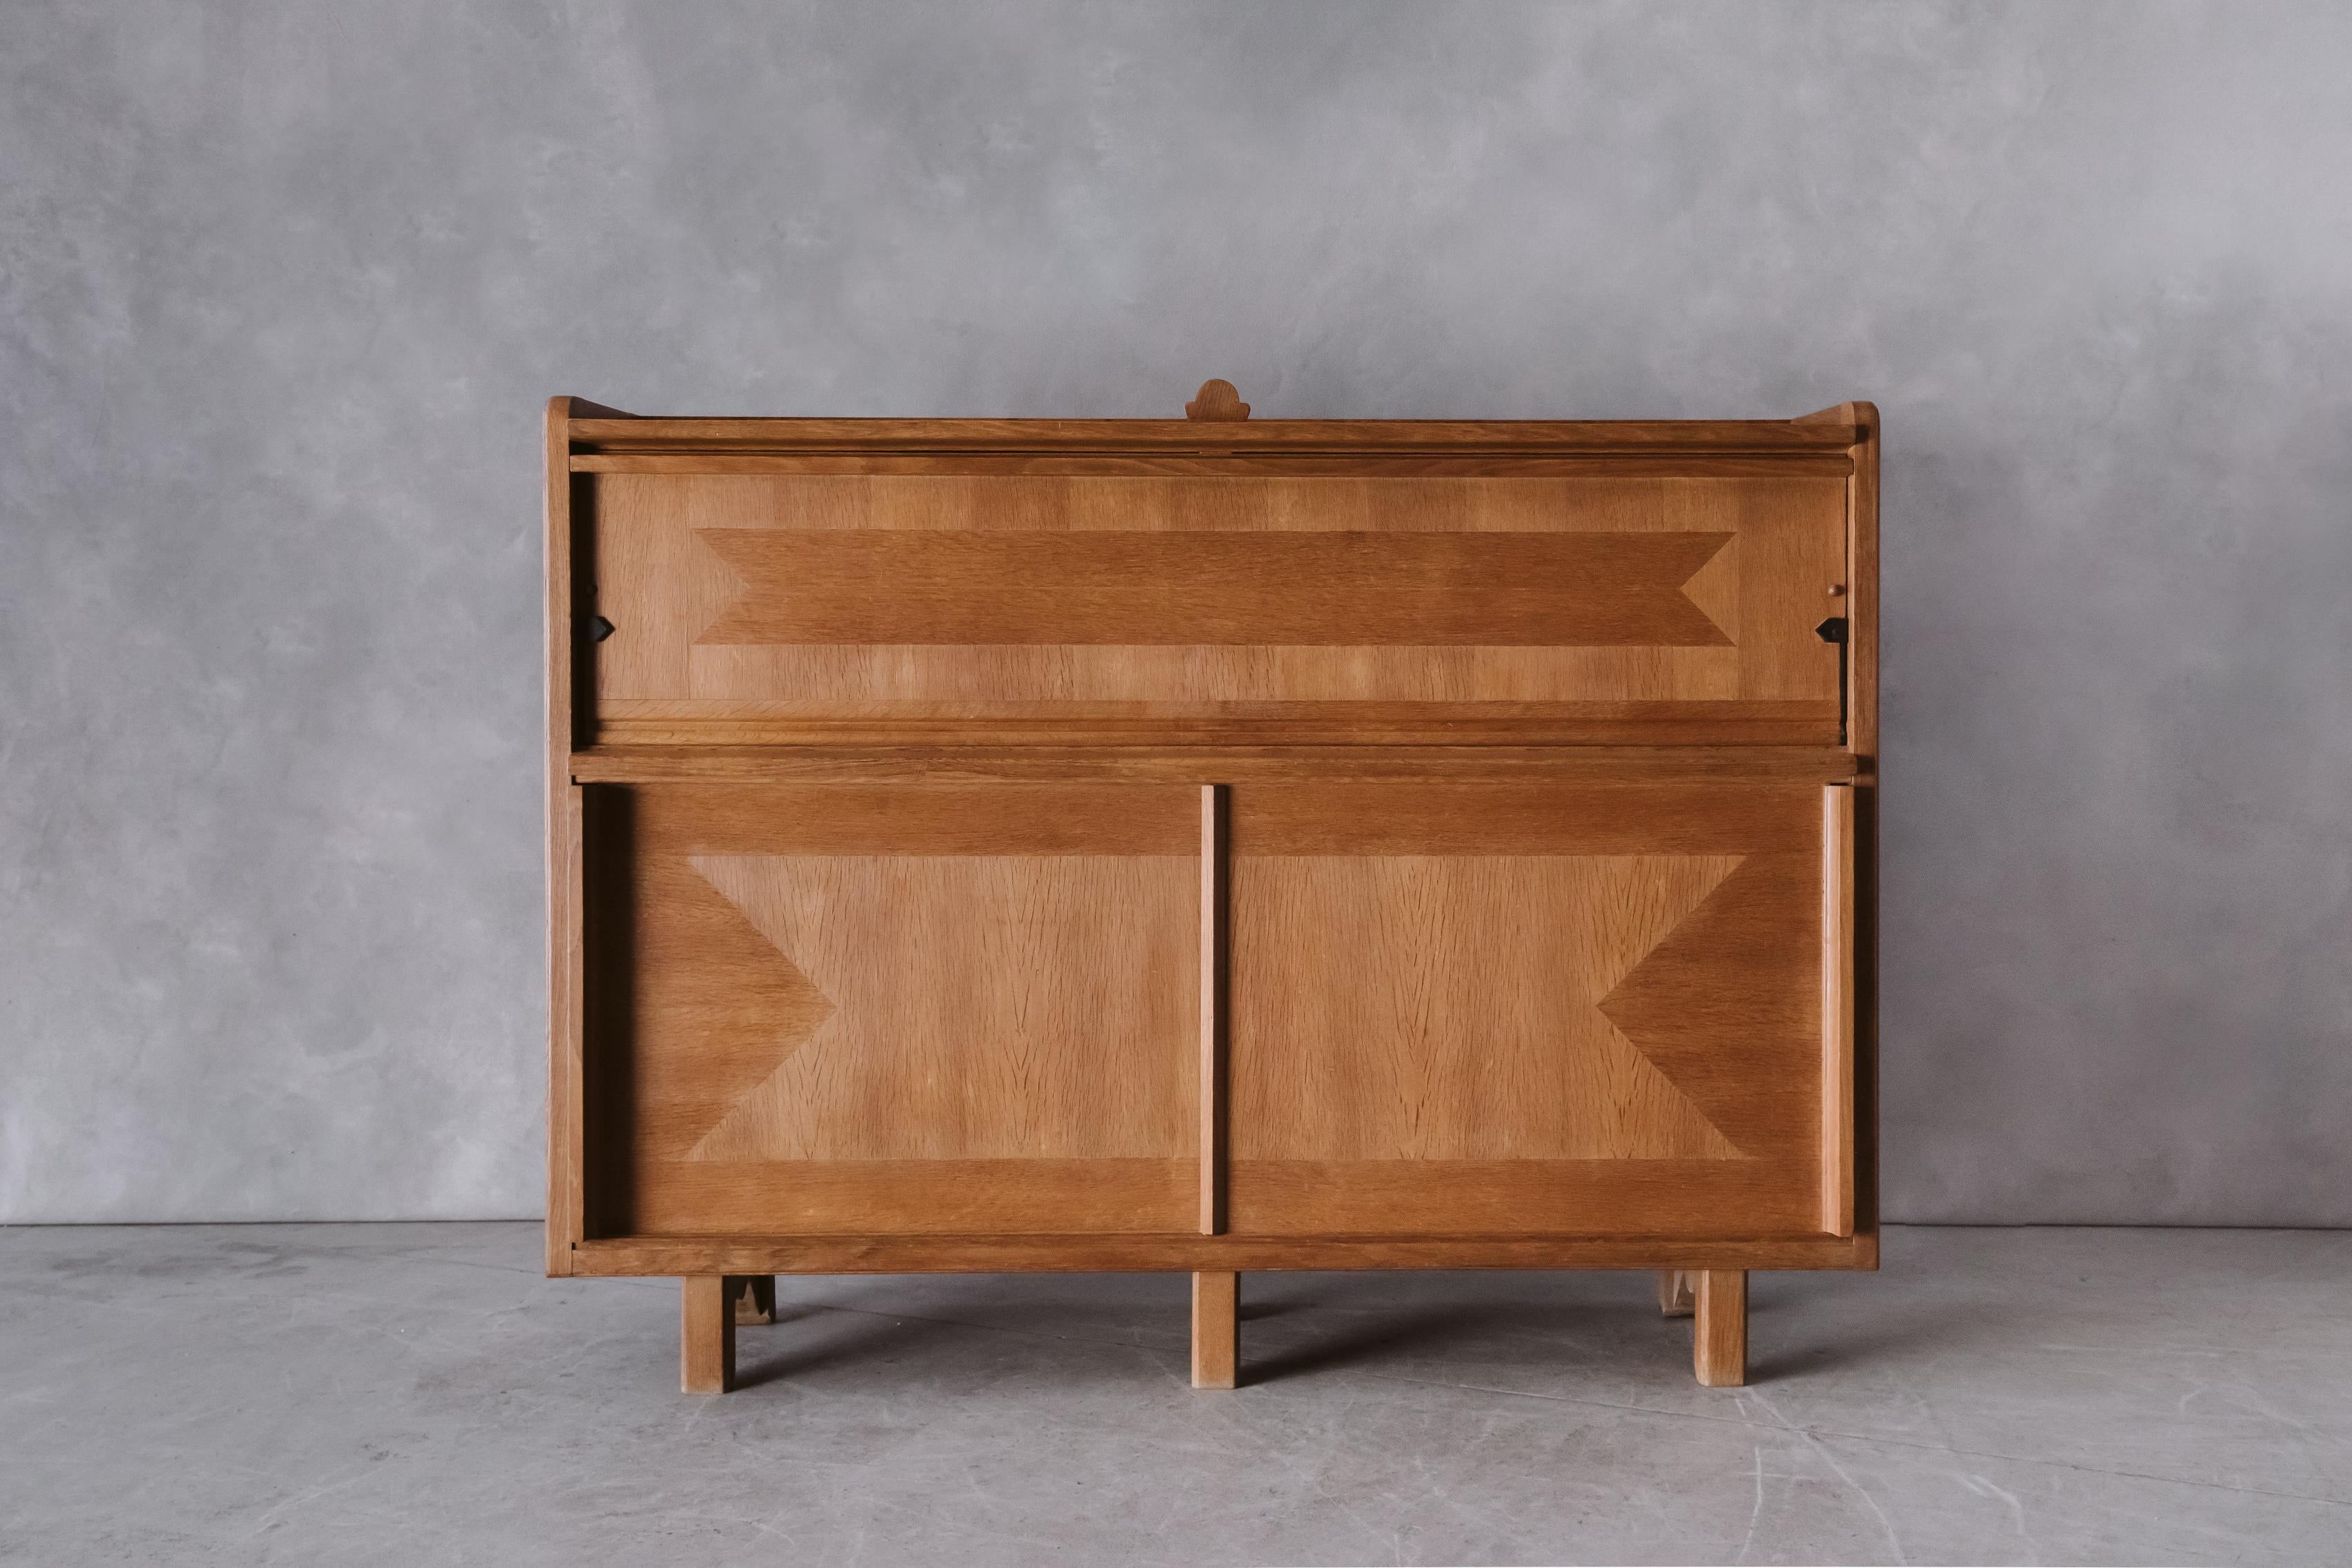 Vintage Oak Guillerme & Chambron Sideboard From France, circa 1960. High quality, solid oak construction with very light wear and use. 

We prefer to speak directly with our clients. So, If you have any questions or would like to know more please